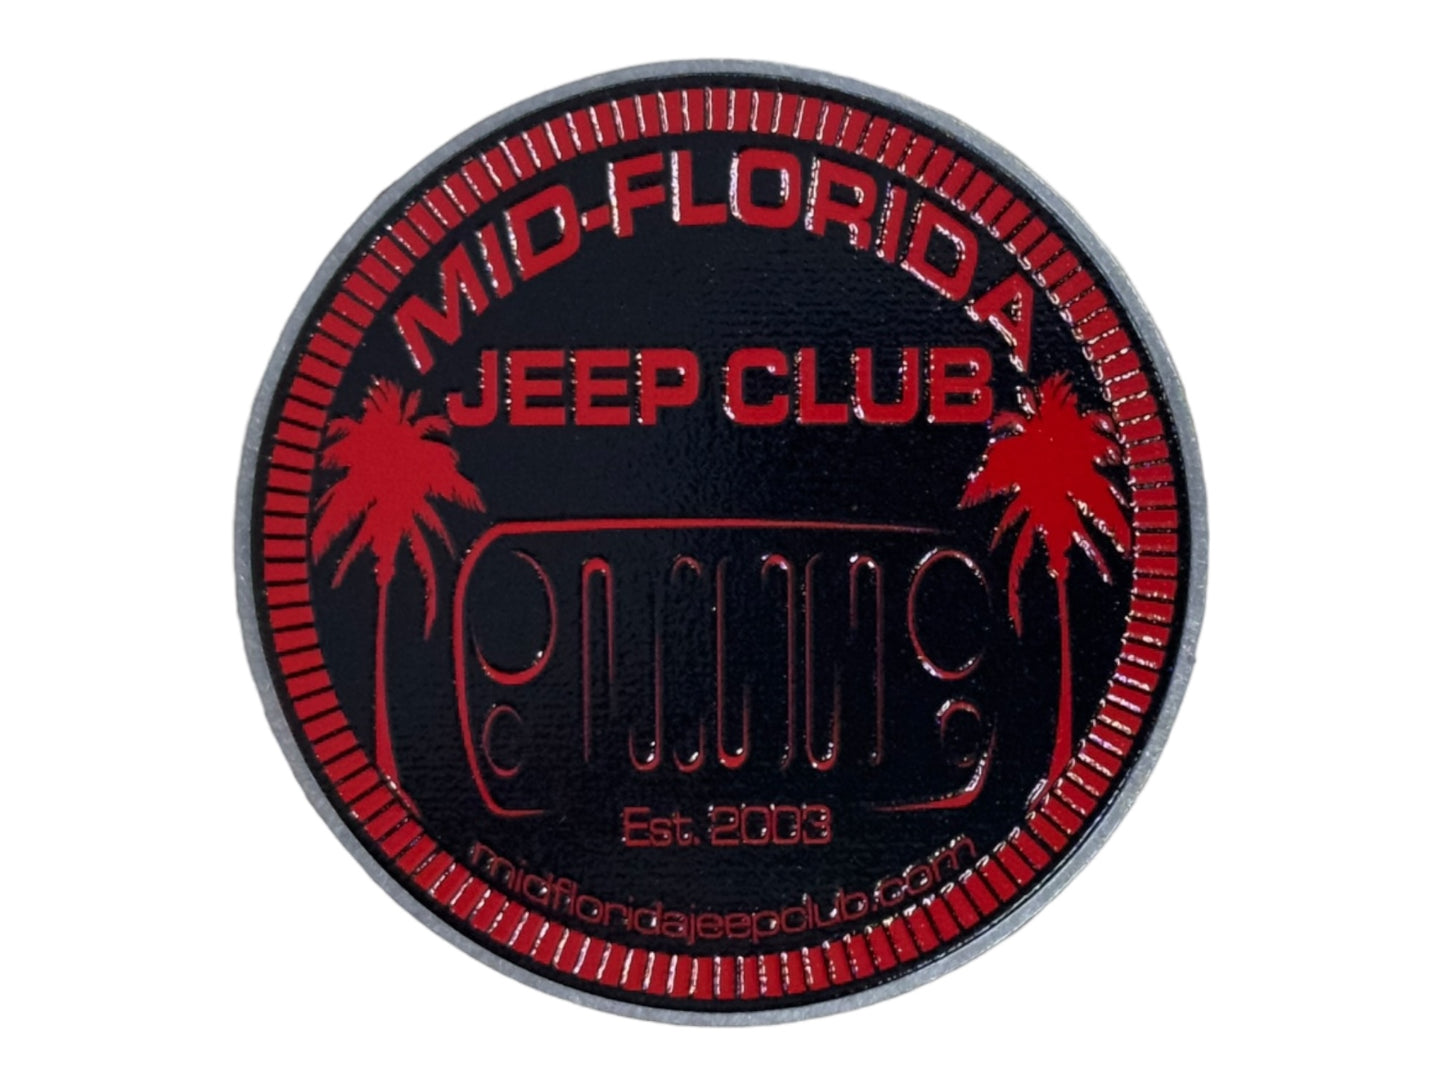 Mid-Florida Club Badge (Multiple Colors Available)